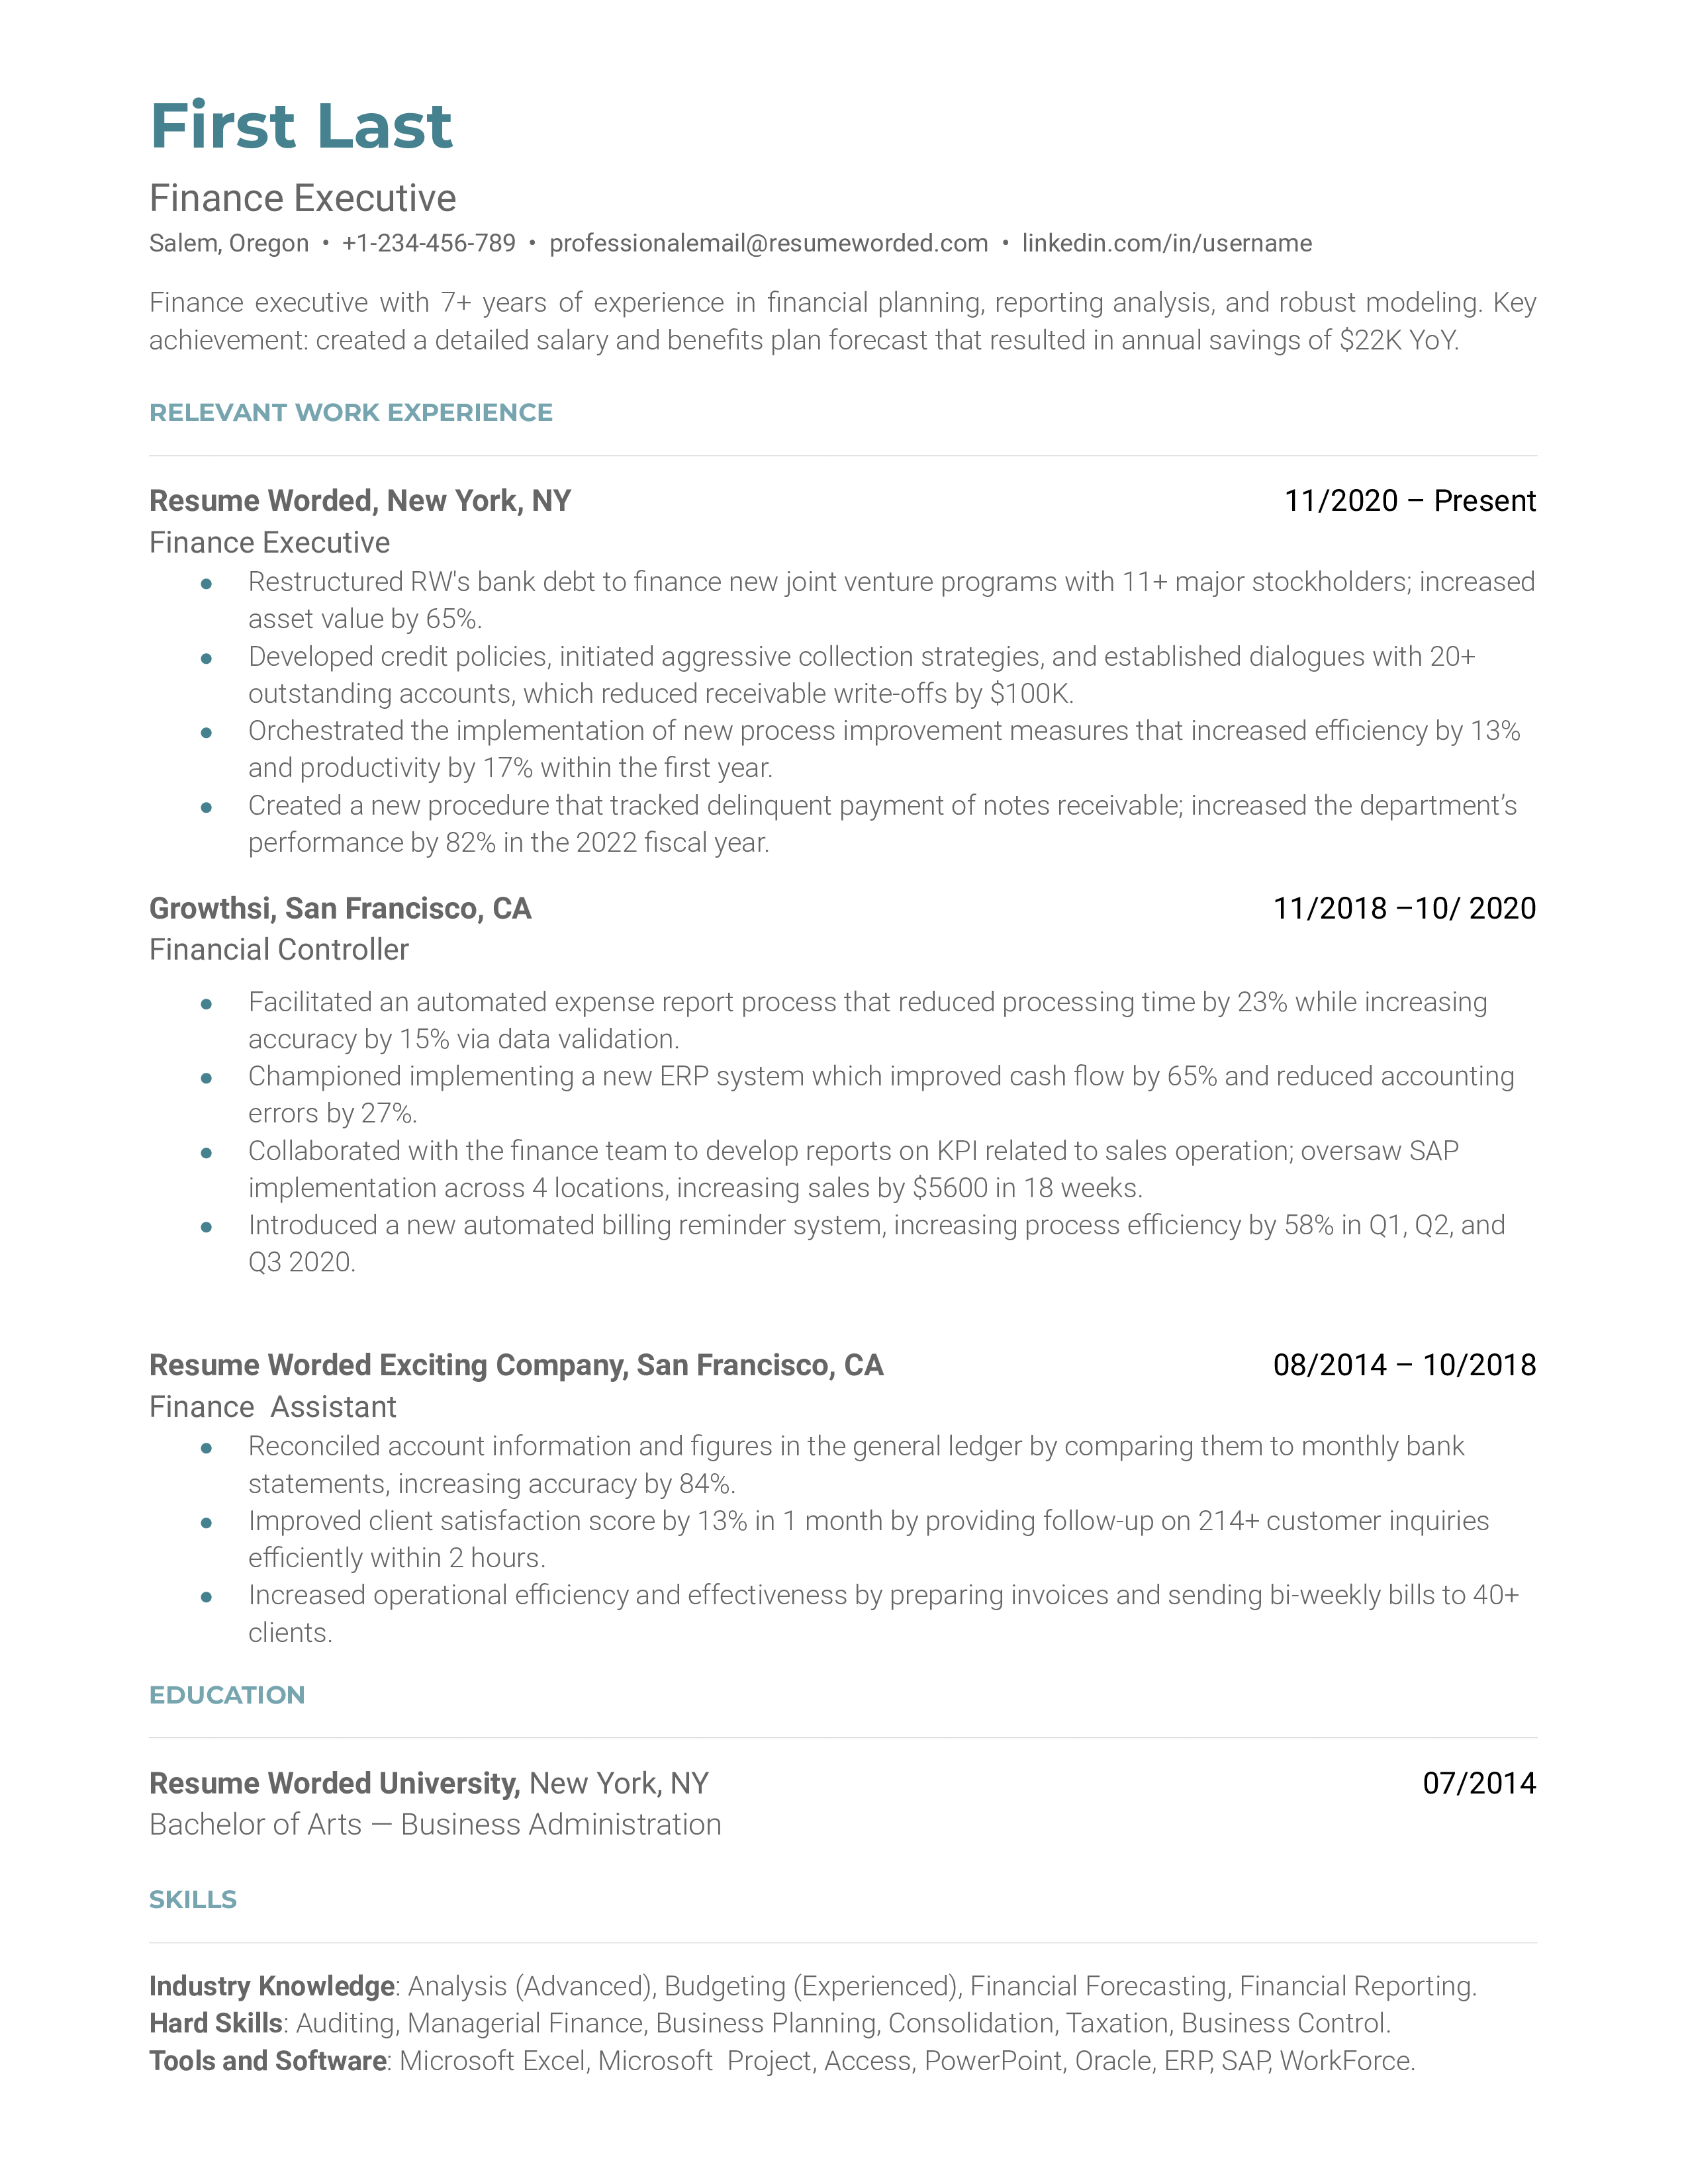 A well-crafted CV for a finance executive role.